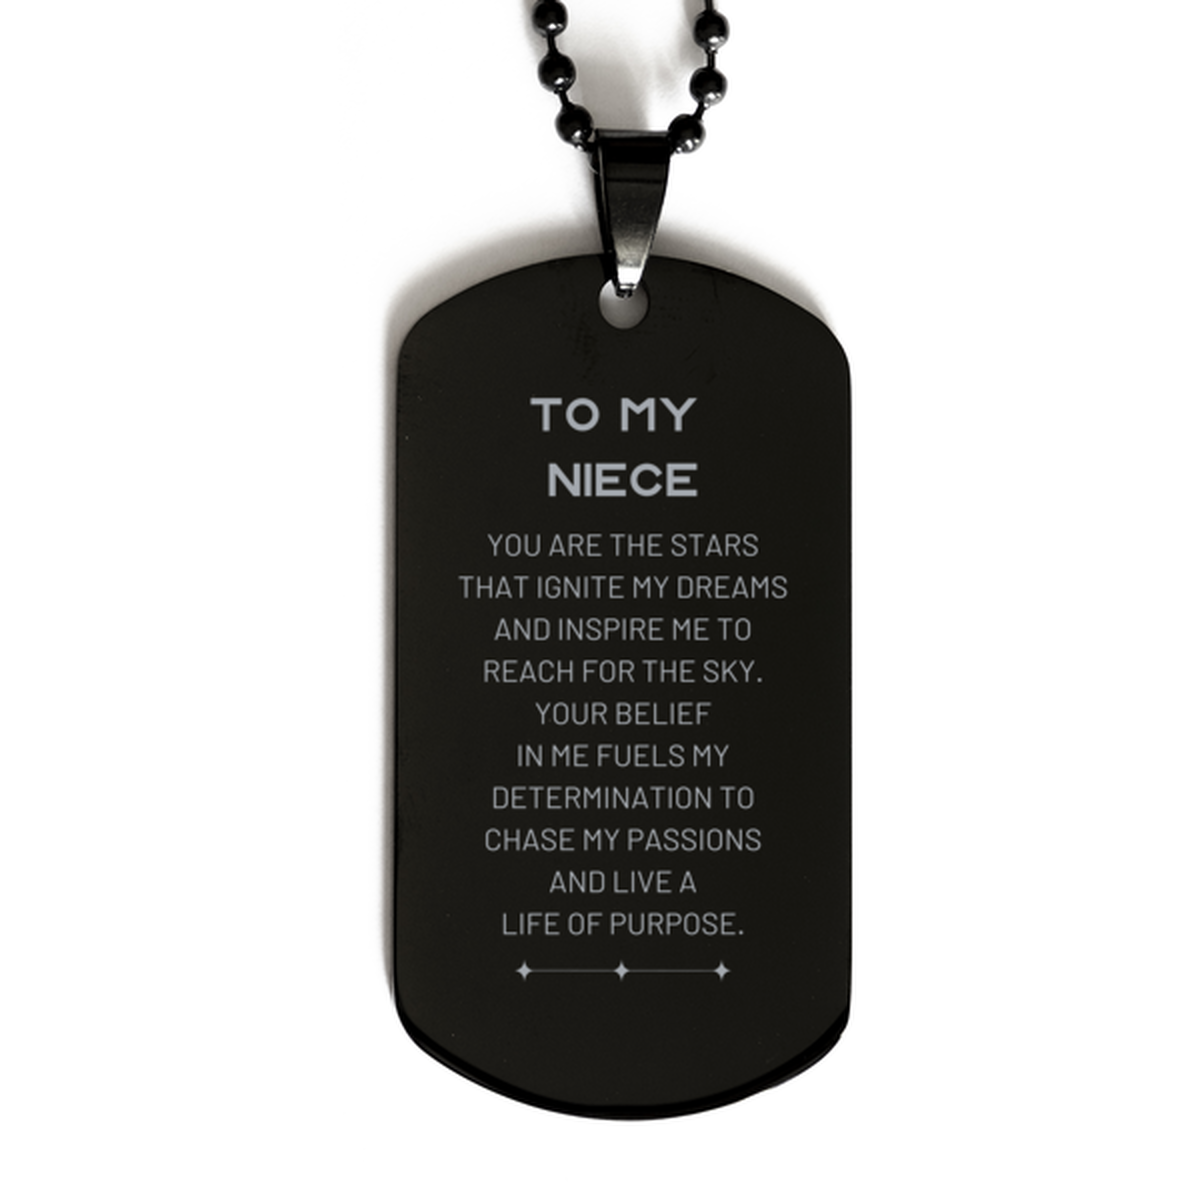 To My Niece Black Dog Tag, You are the stars that ignite my dreams and inspire me to reach for the sky, Birthday Unique Gifts For Niece, Thank You Gifts For Niece